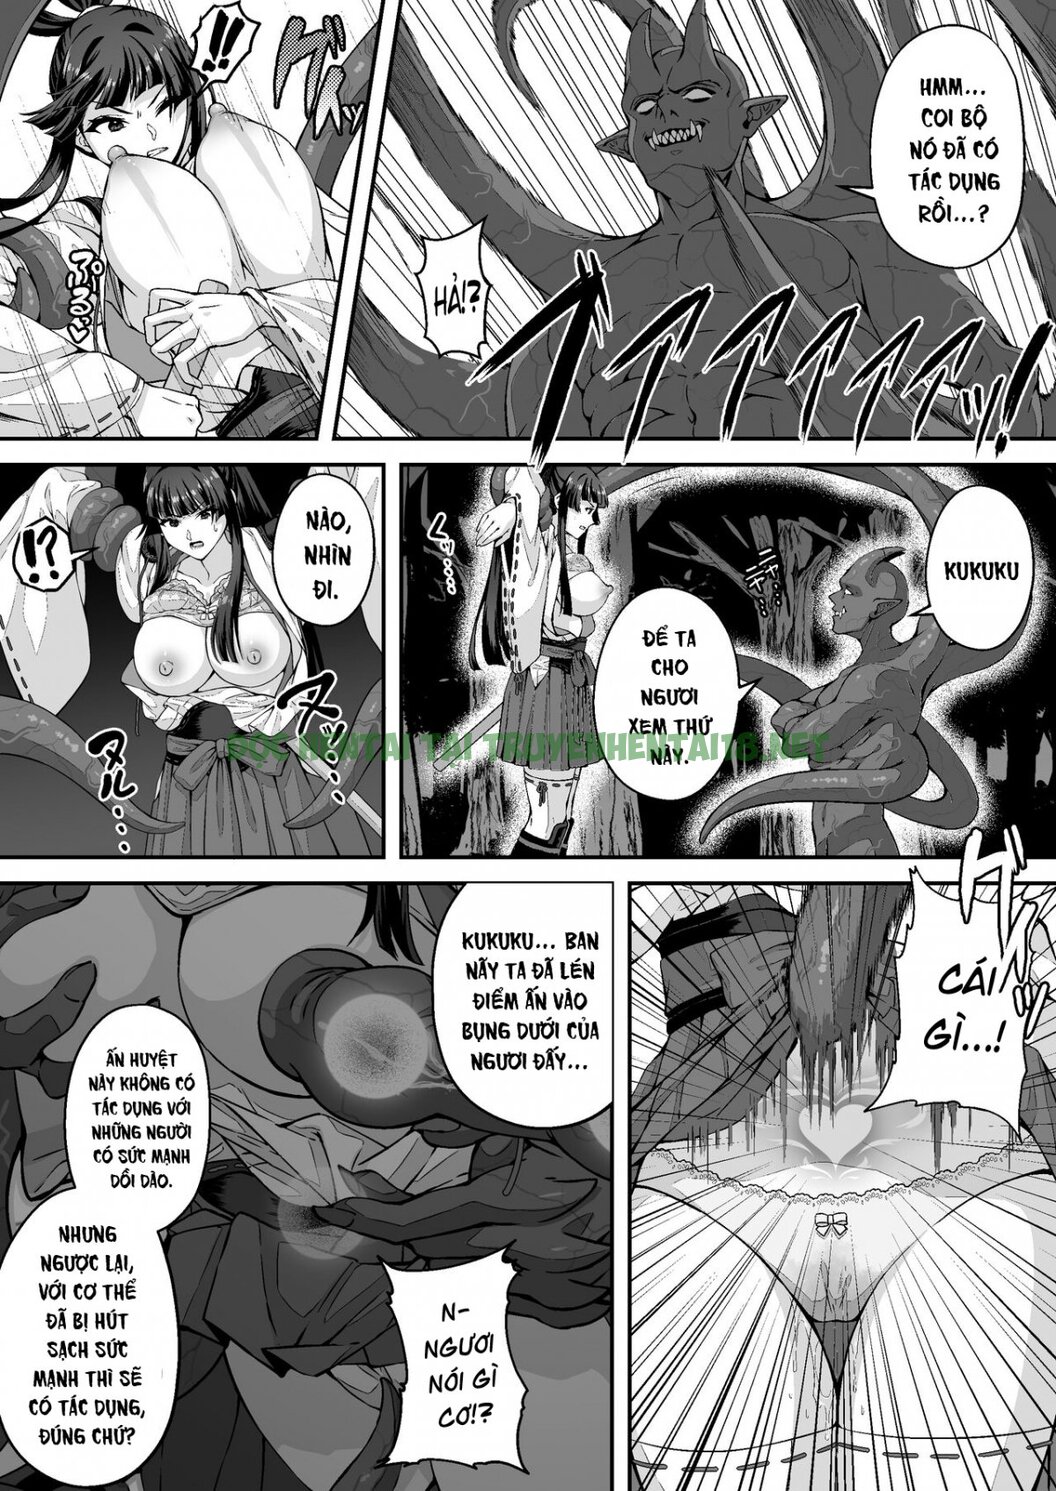 Hình ảnh 25 trong The Master Demon Exorcist Doesn't Succumb To Tentacle Demon - One Shot